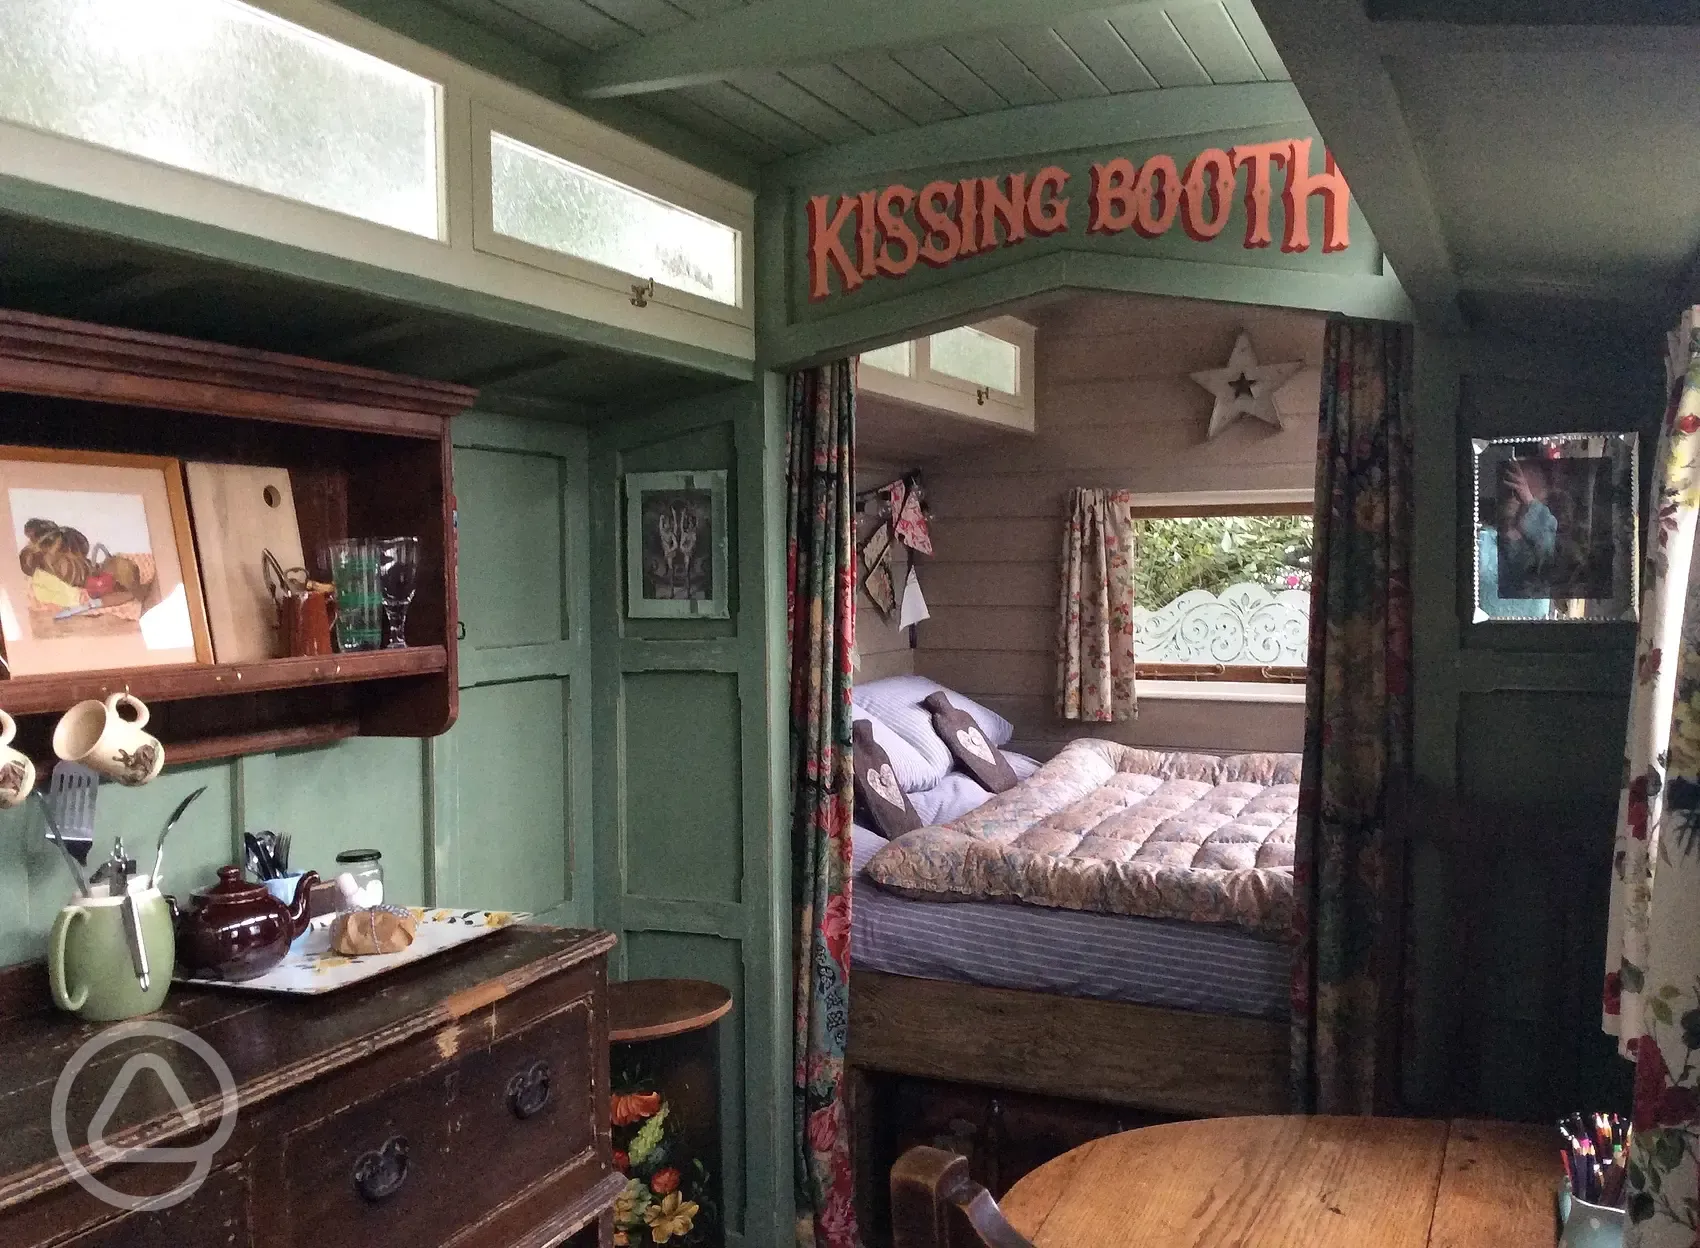 'Kissing Booth' in the Showman's Wagon - comfy Kingsize bed